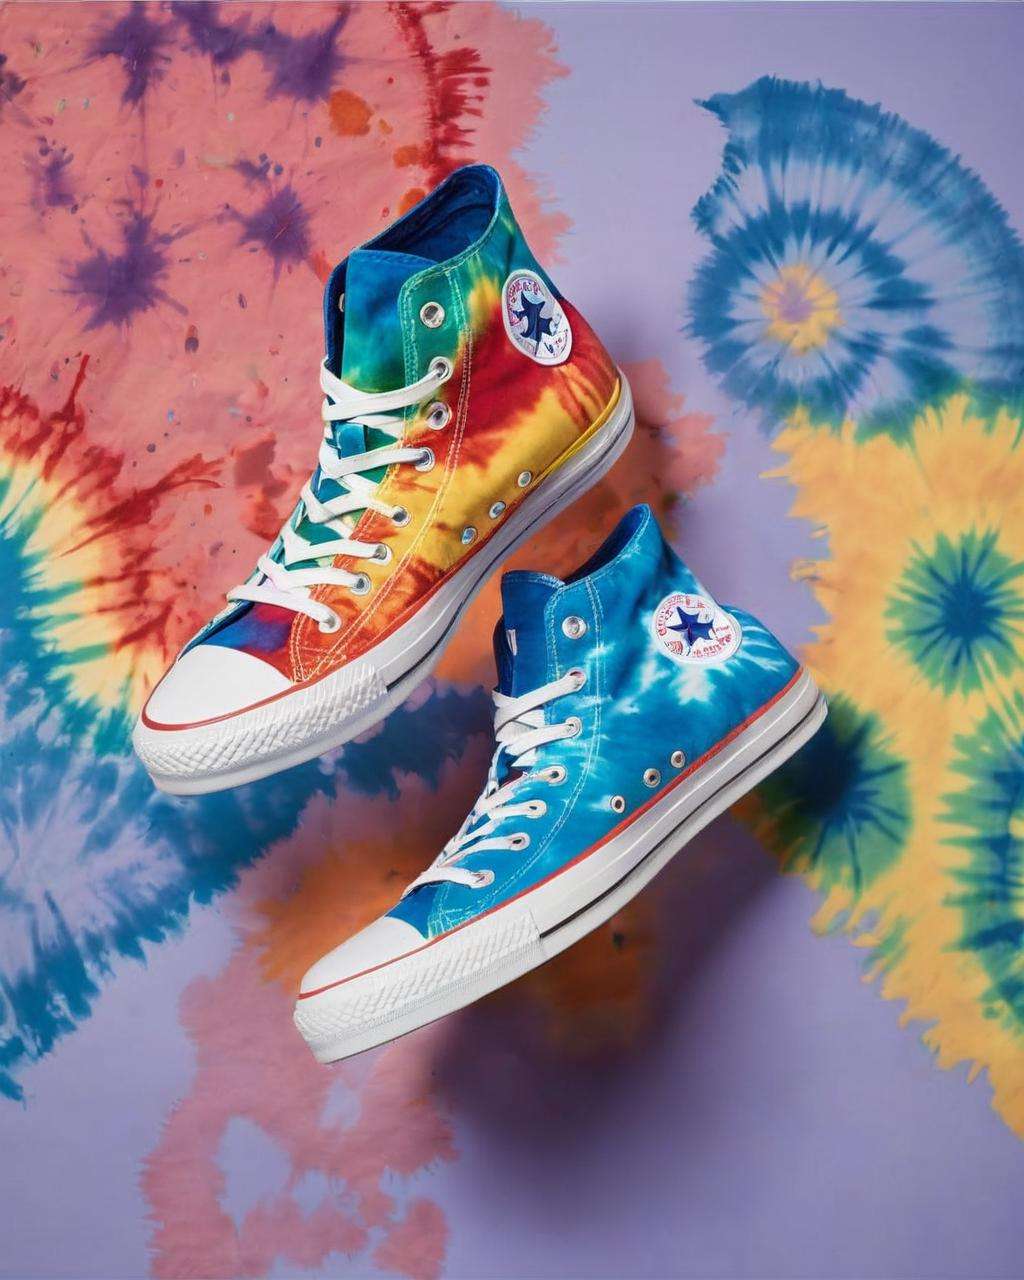 Converse Chuck Taylor tie-dye sneakers, artistic expression:0.6, photographed in a creative, colorful setup, highlighting their unique patterns and vibrant tones, reflecting the wearer's individuality and style, lifestyle shot:0.8.<lora:shoes:1.0>